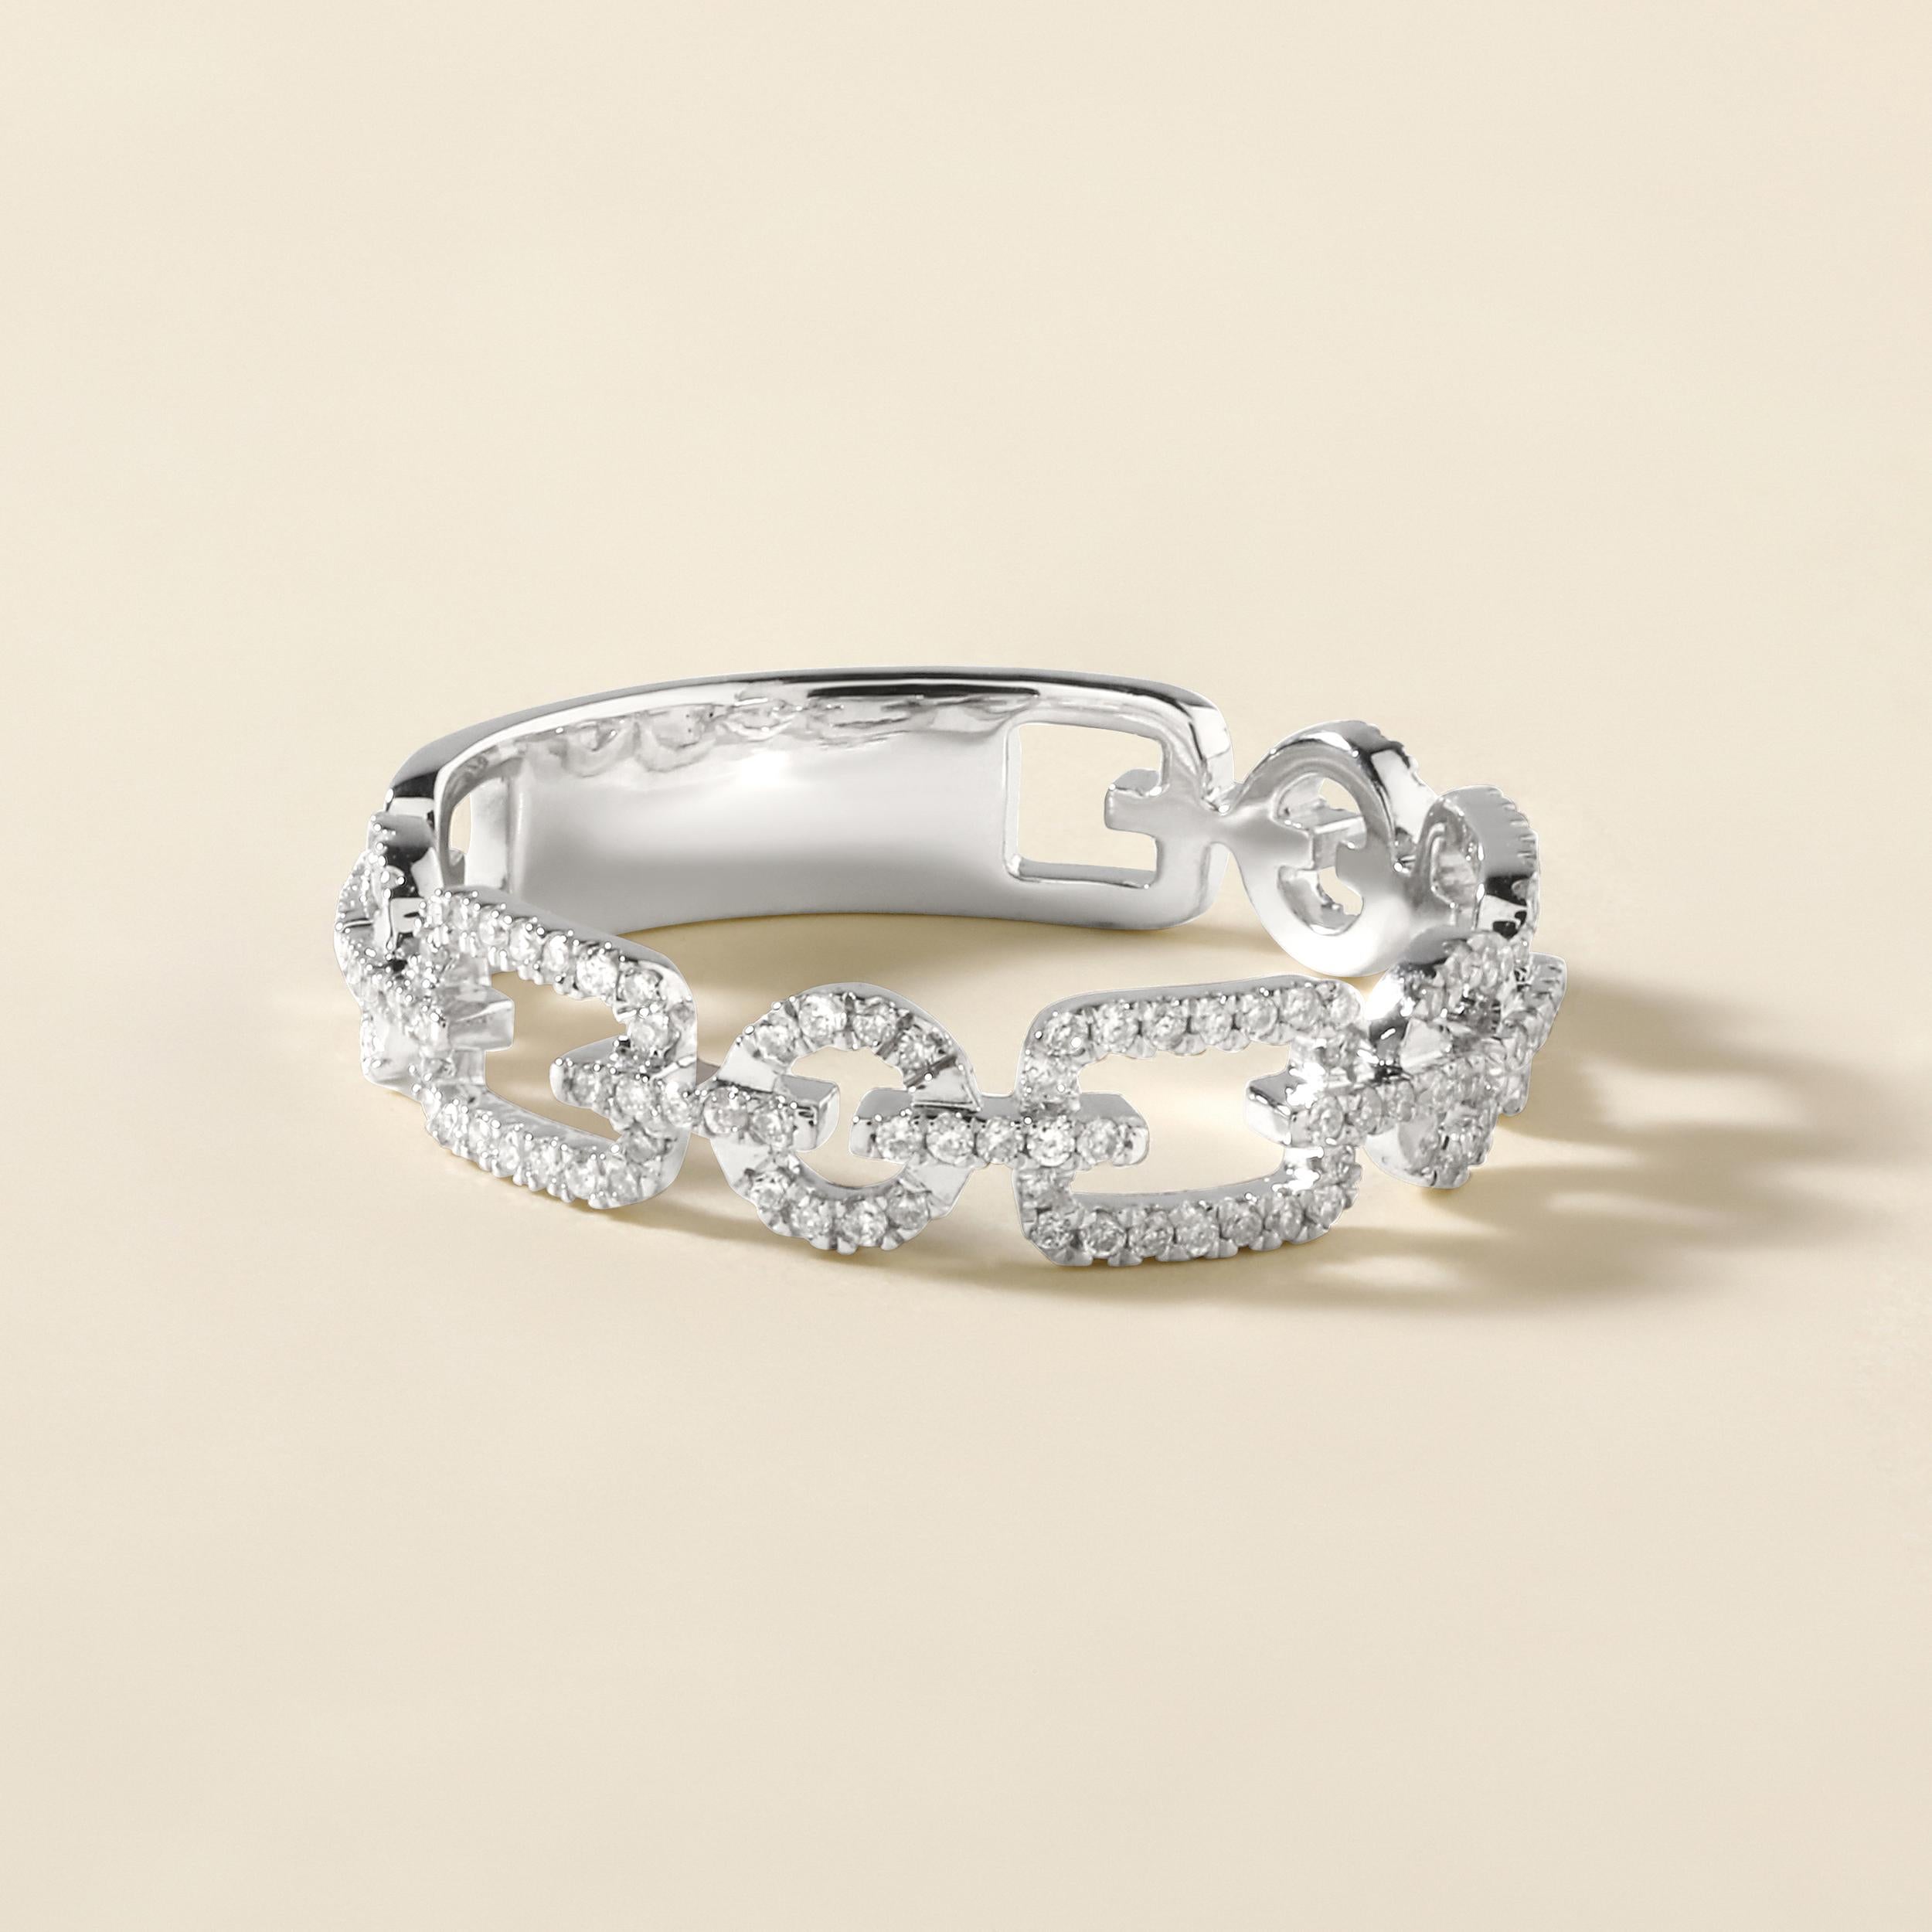 Ring Size: US 7

Crafted in 2.06 grams of 14K White Gold, the ring contains 126 stones of Round Natural Diamonds with a total of 0.24 carat in G-H color and I1-I2 clarity.combined with 1 stone of Round Solitaire Natural Diamond with a total of 0.16